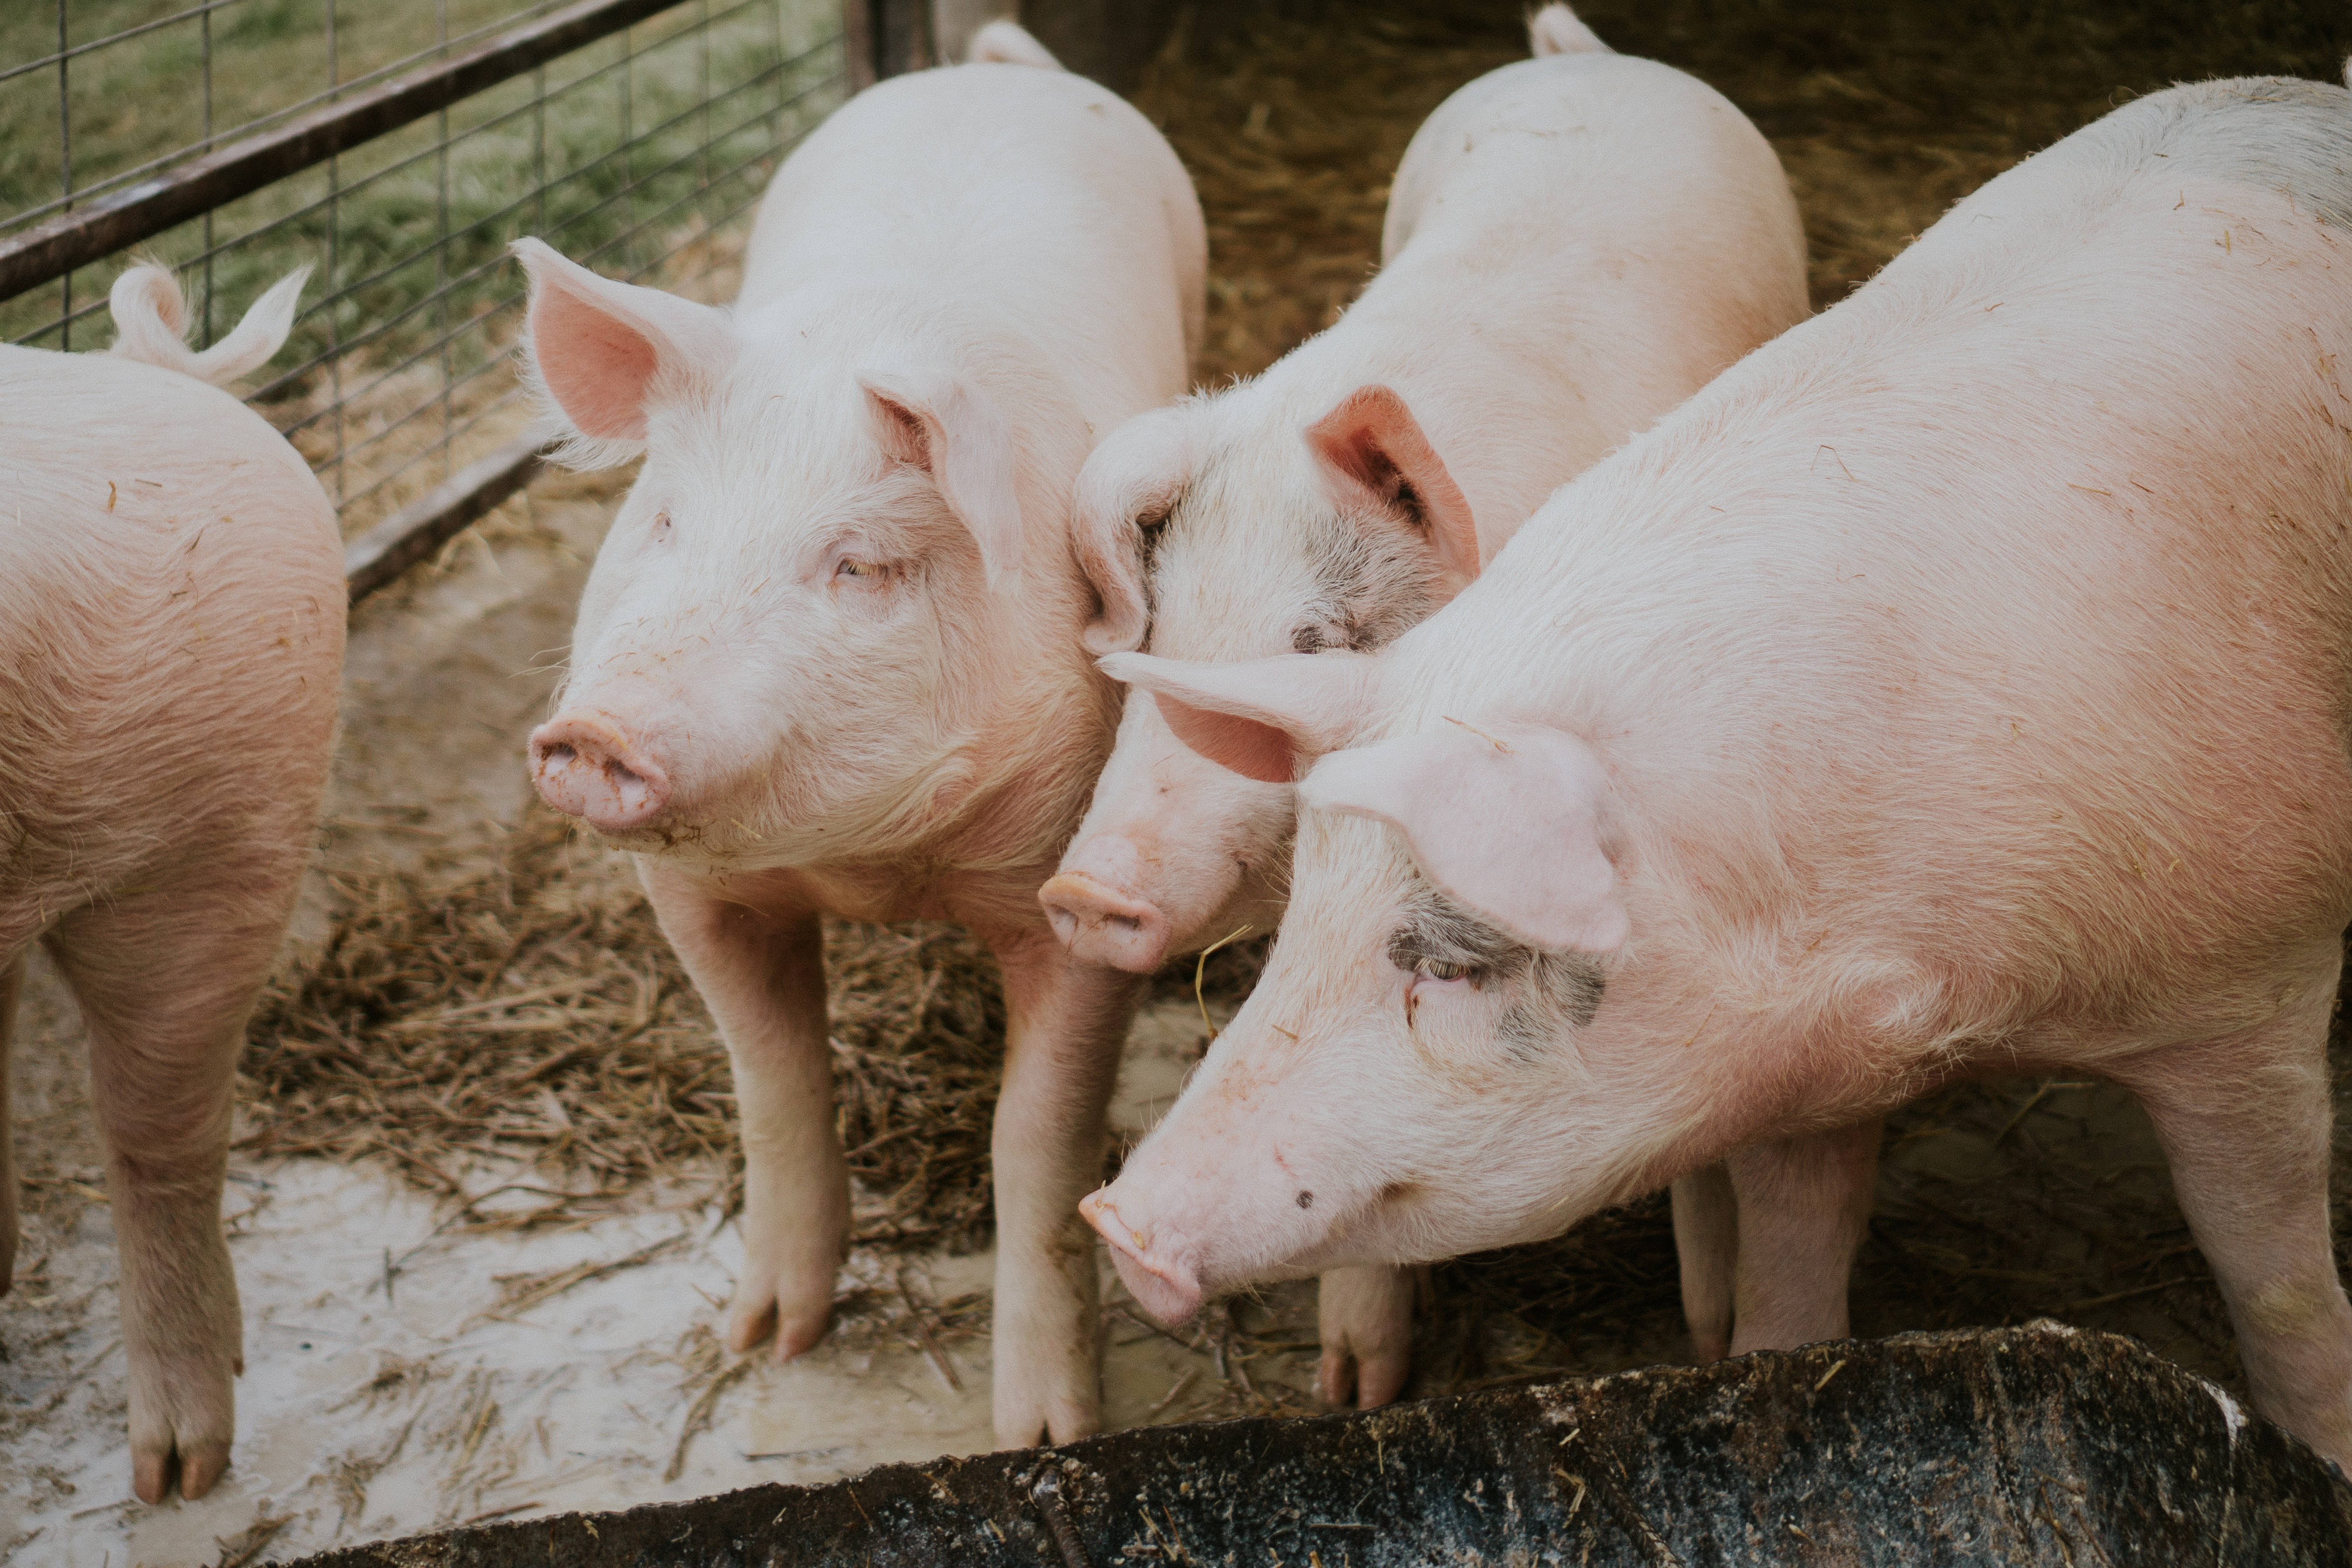 The technology founders saw a way to leverage their parasitic technology into feed and weigh with pigs